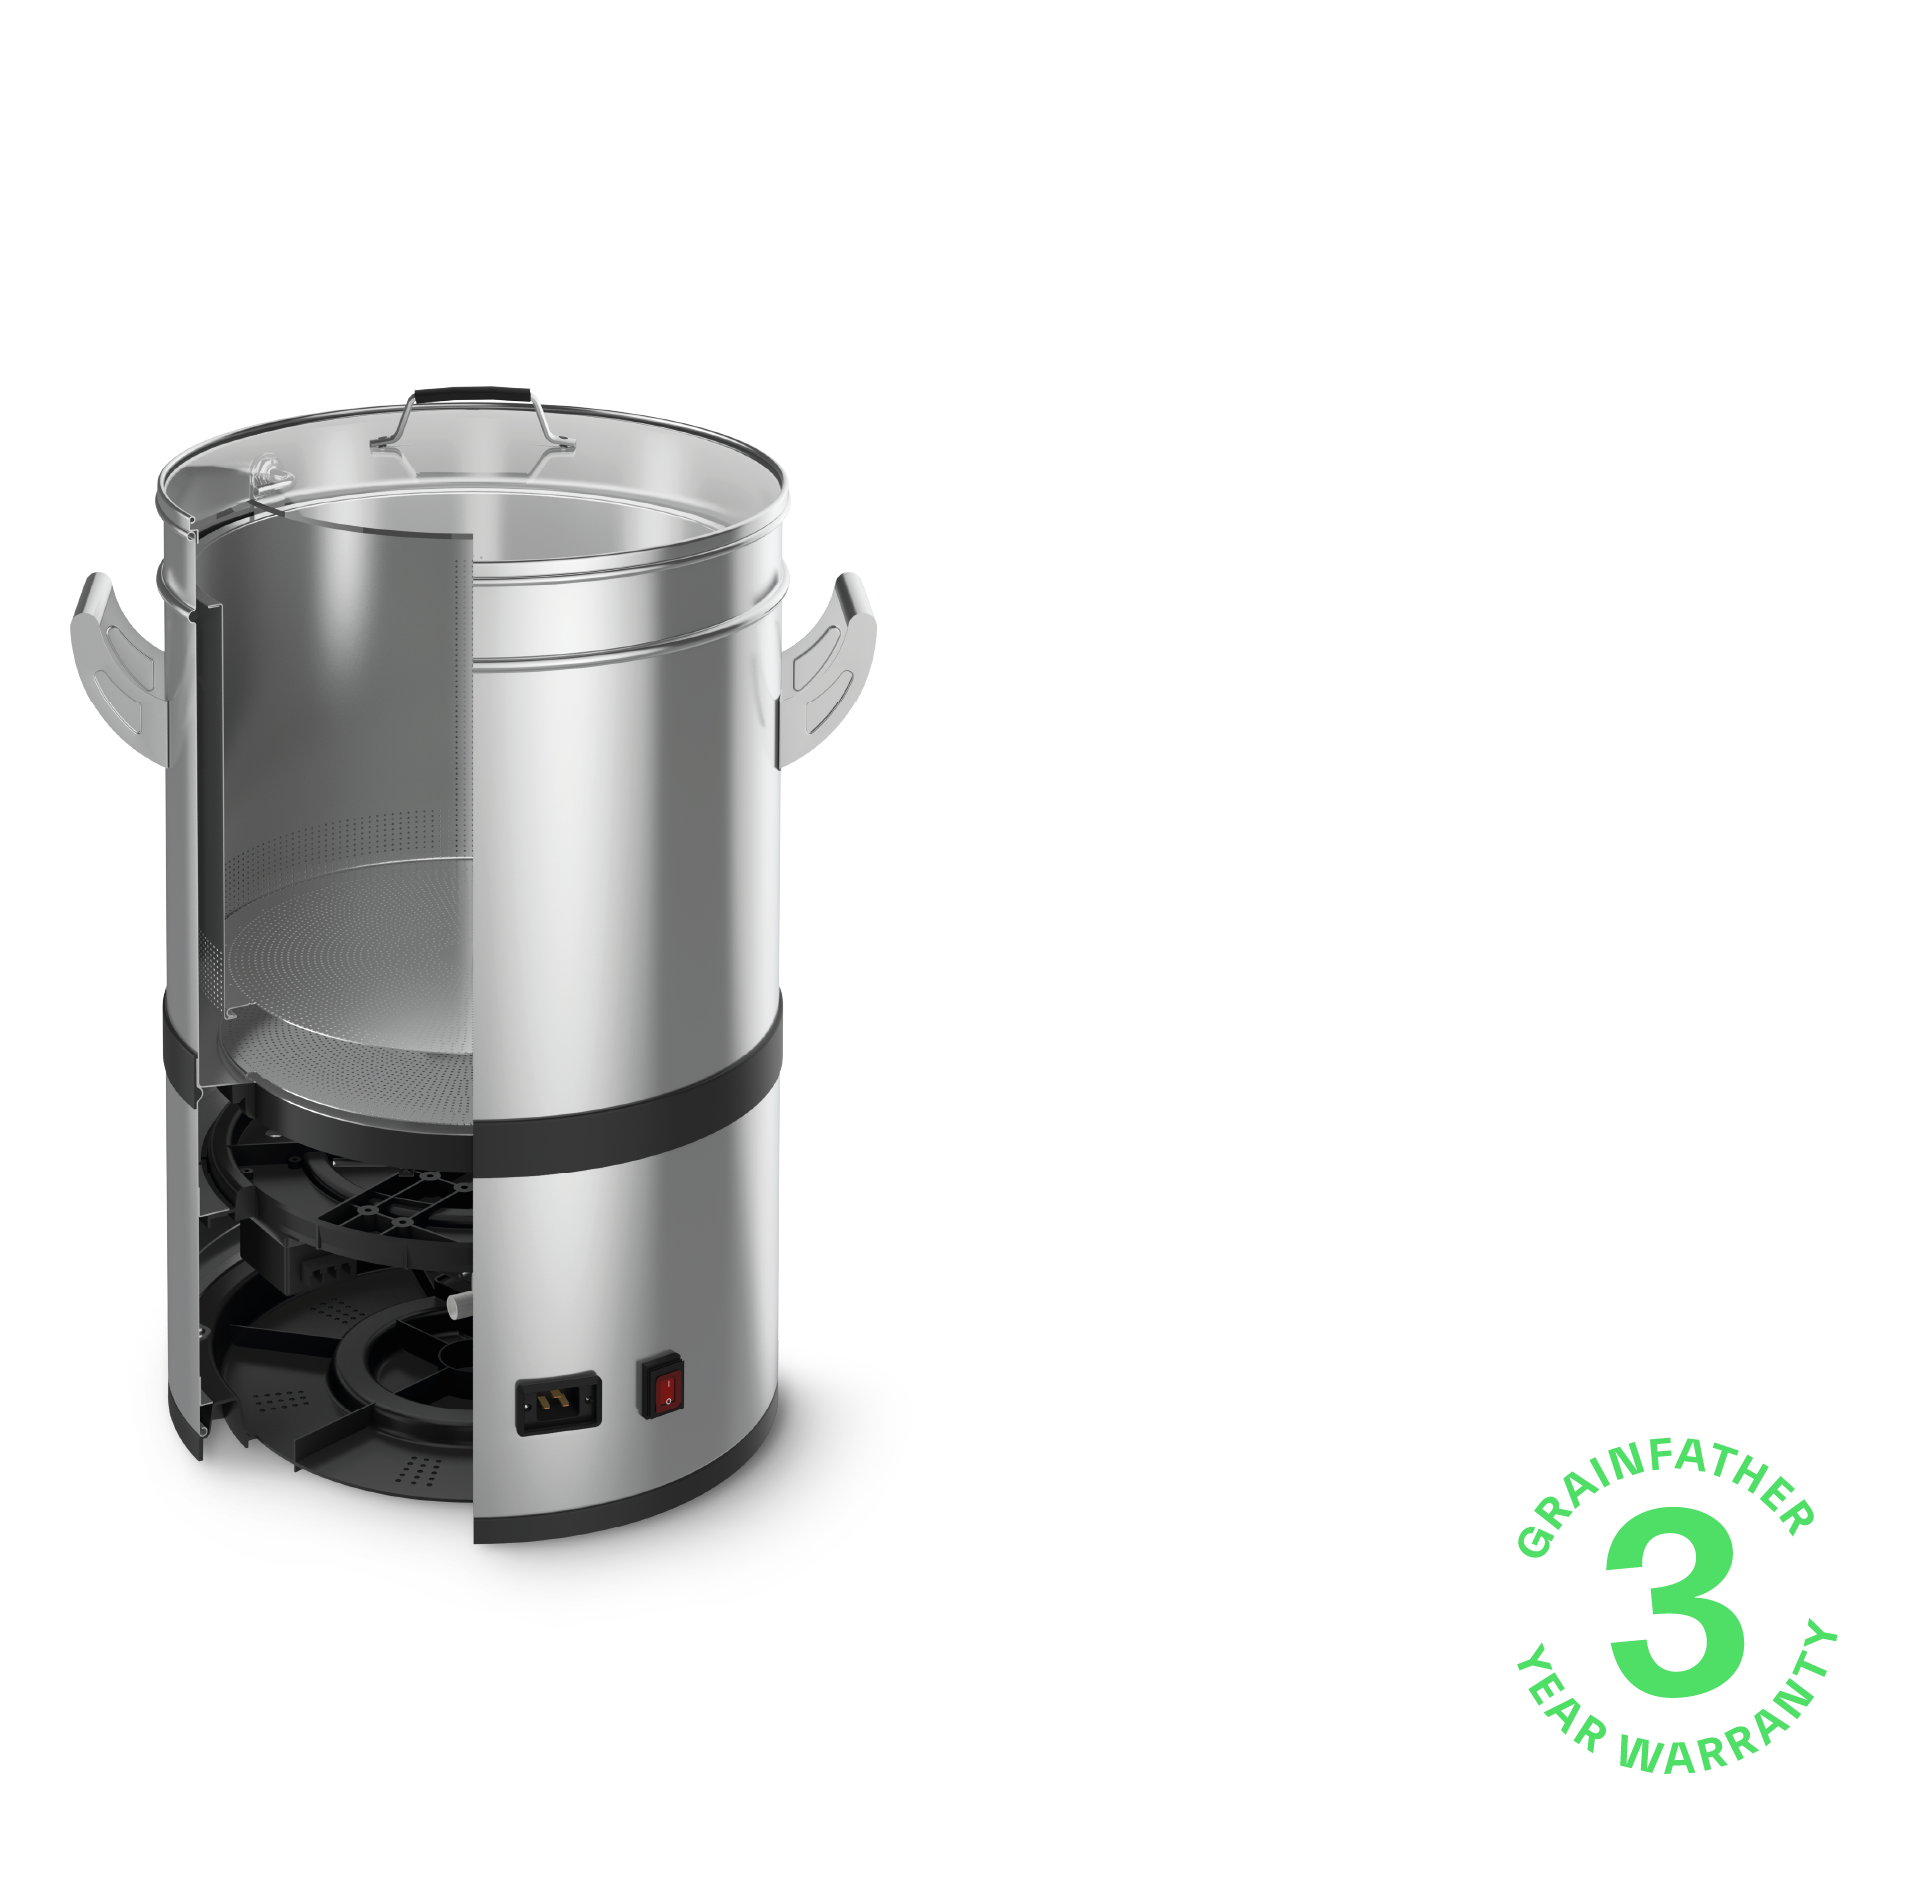 Grainfather G40 Features